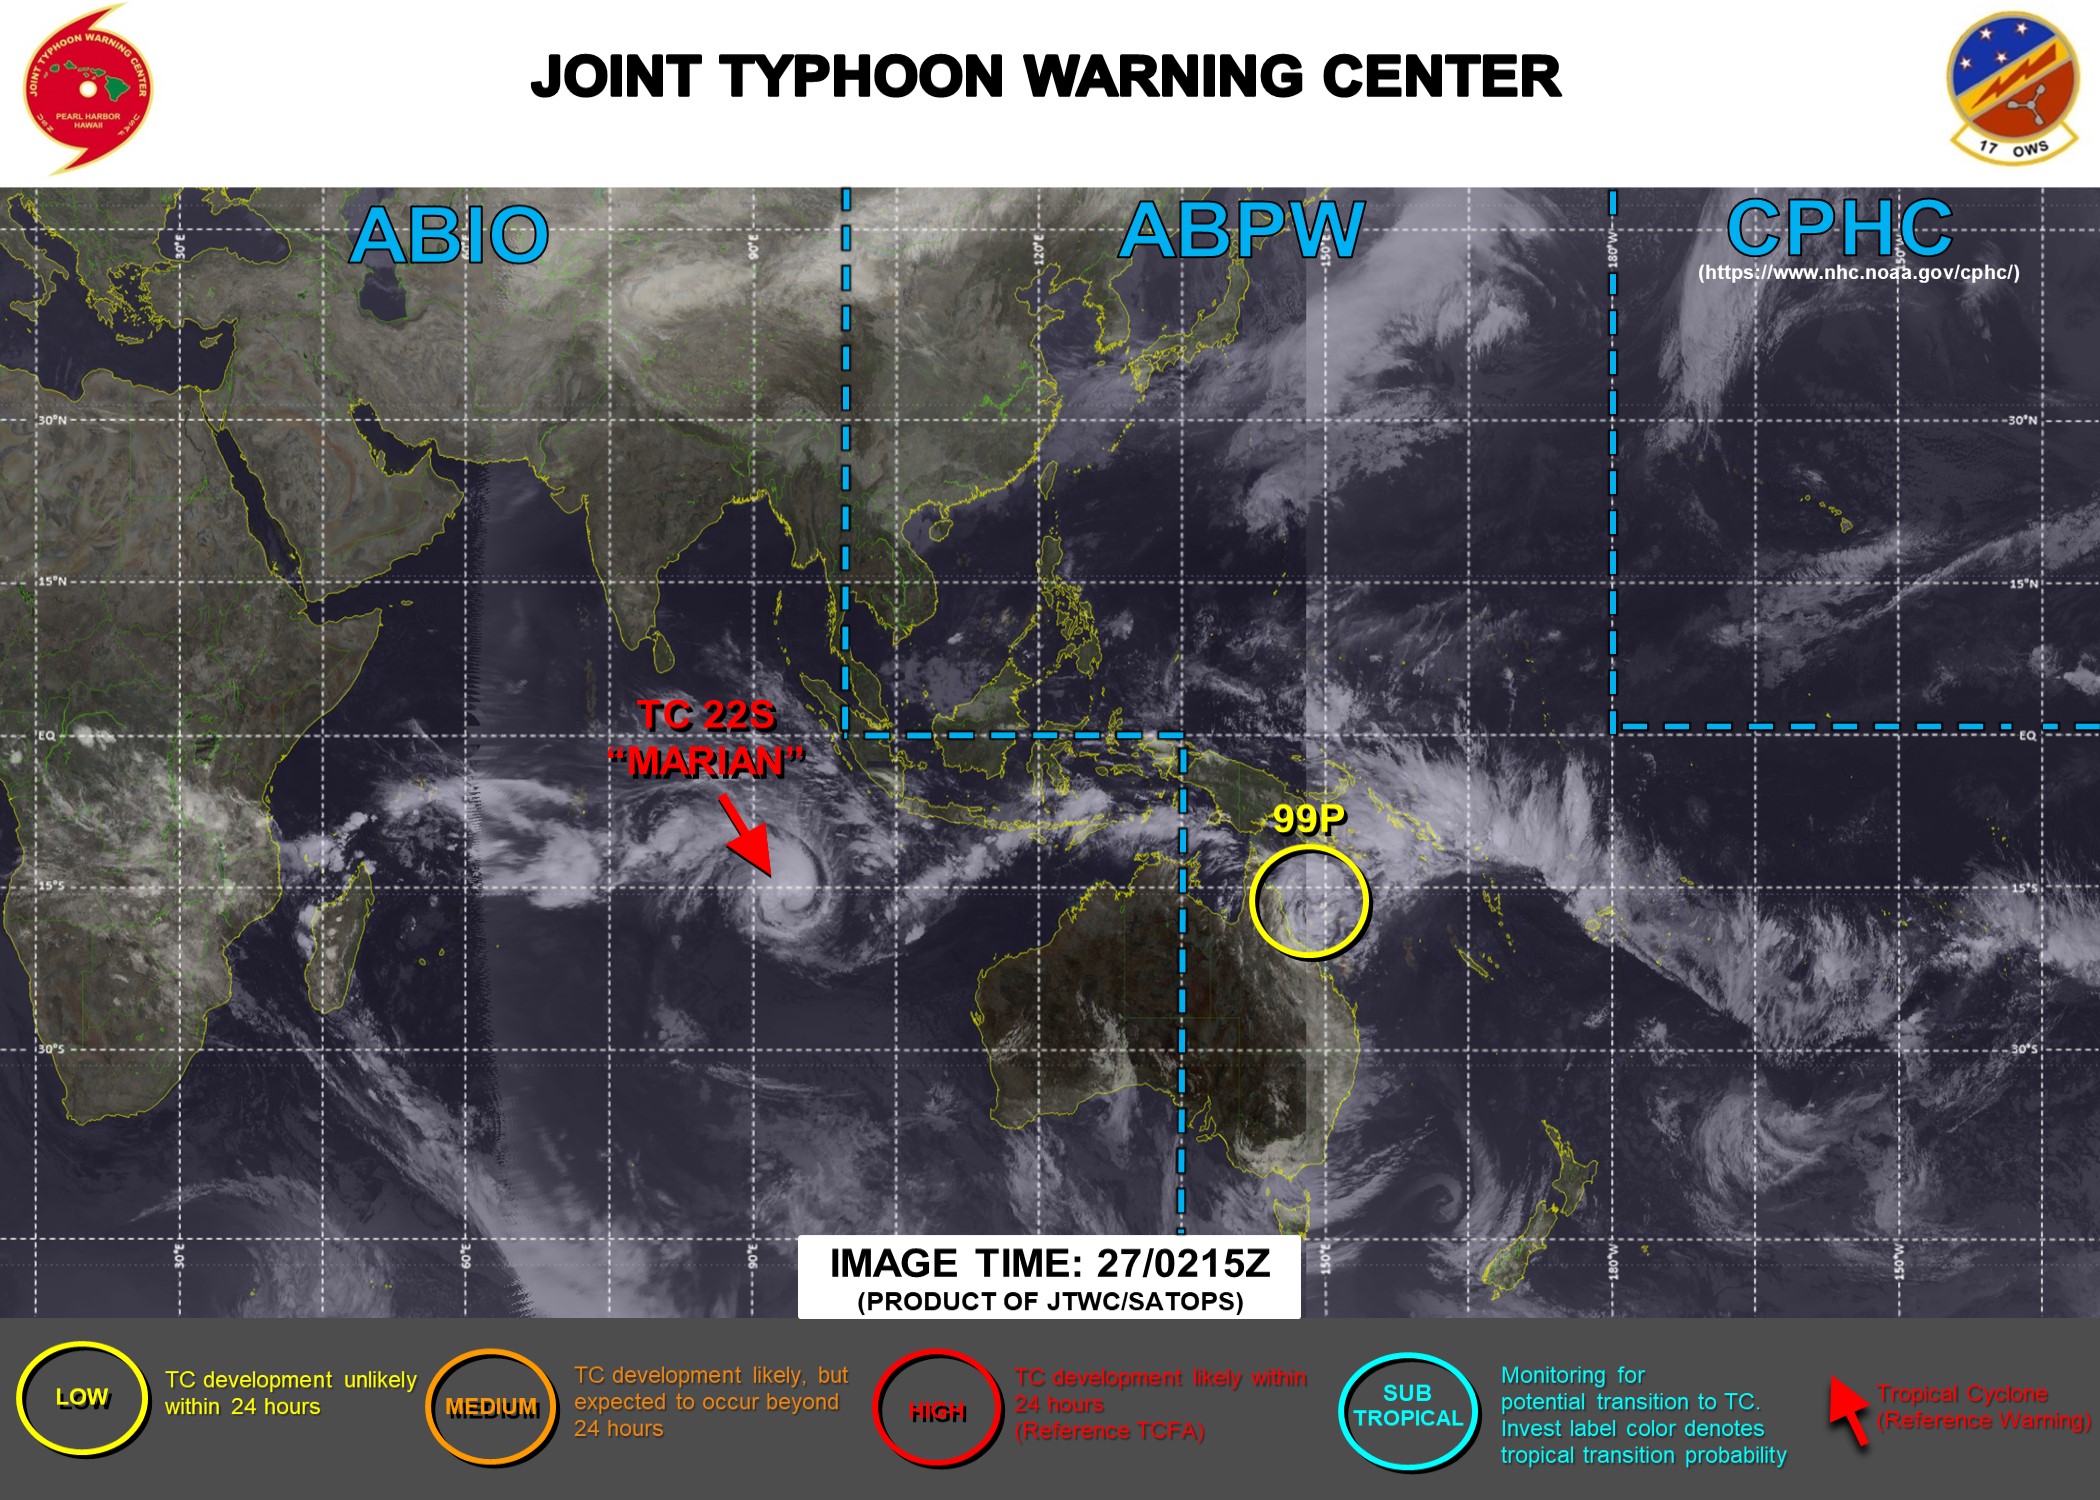 27/03UTC. JTWC IS ISSUING 12HOURLY WARNINGS AND 3 HOURLY SATELLITE BULLETINS ON TC 22S(MARIAN). INVEST 99P IS NOW ON THE MAP AND IS LOW FOR THE NEXT 24HOURS.